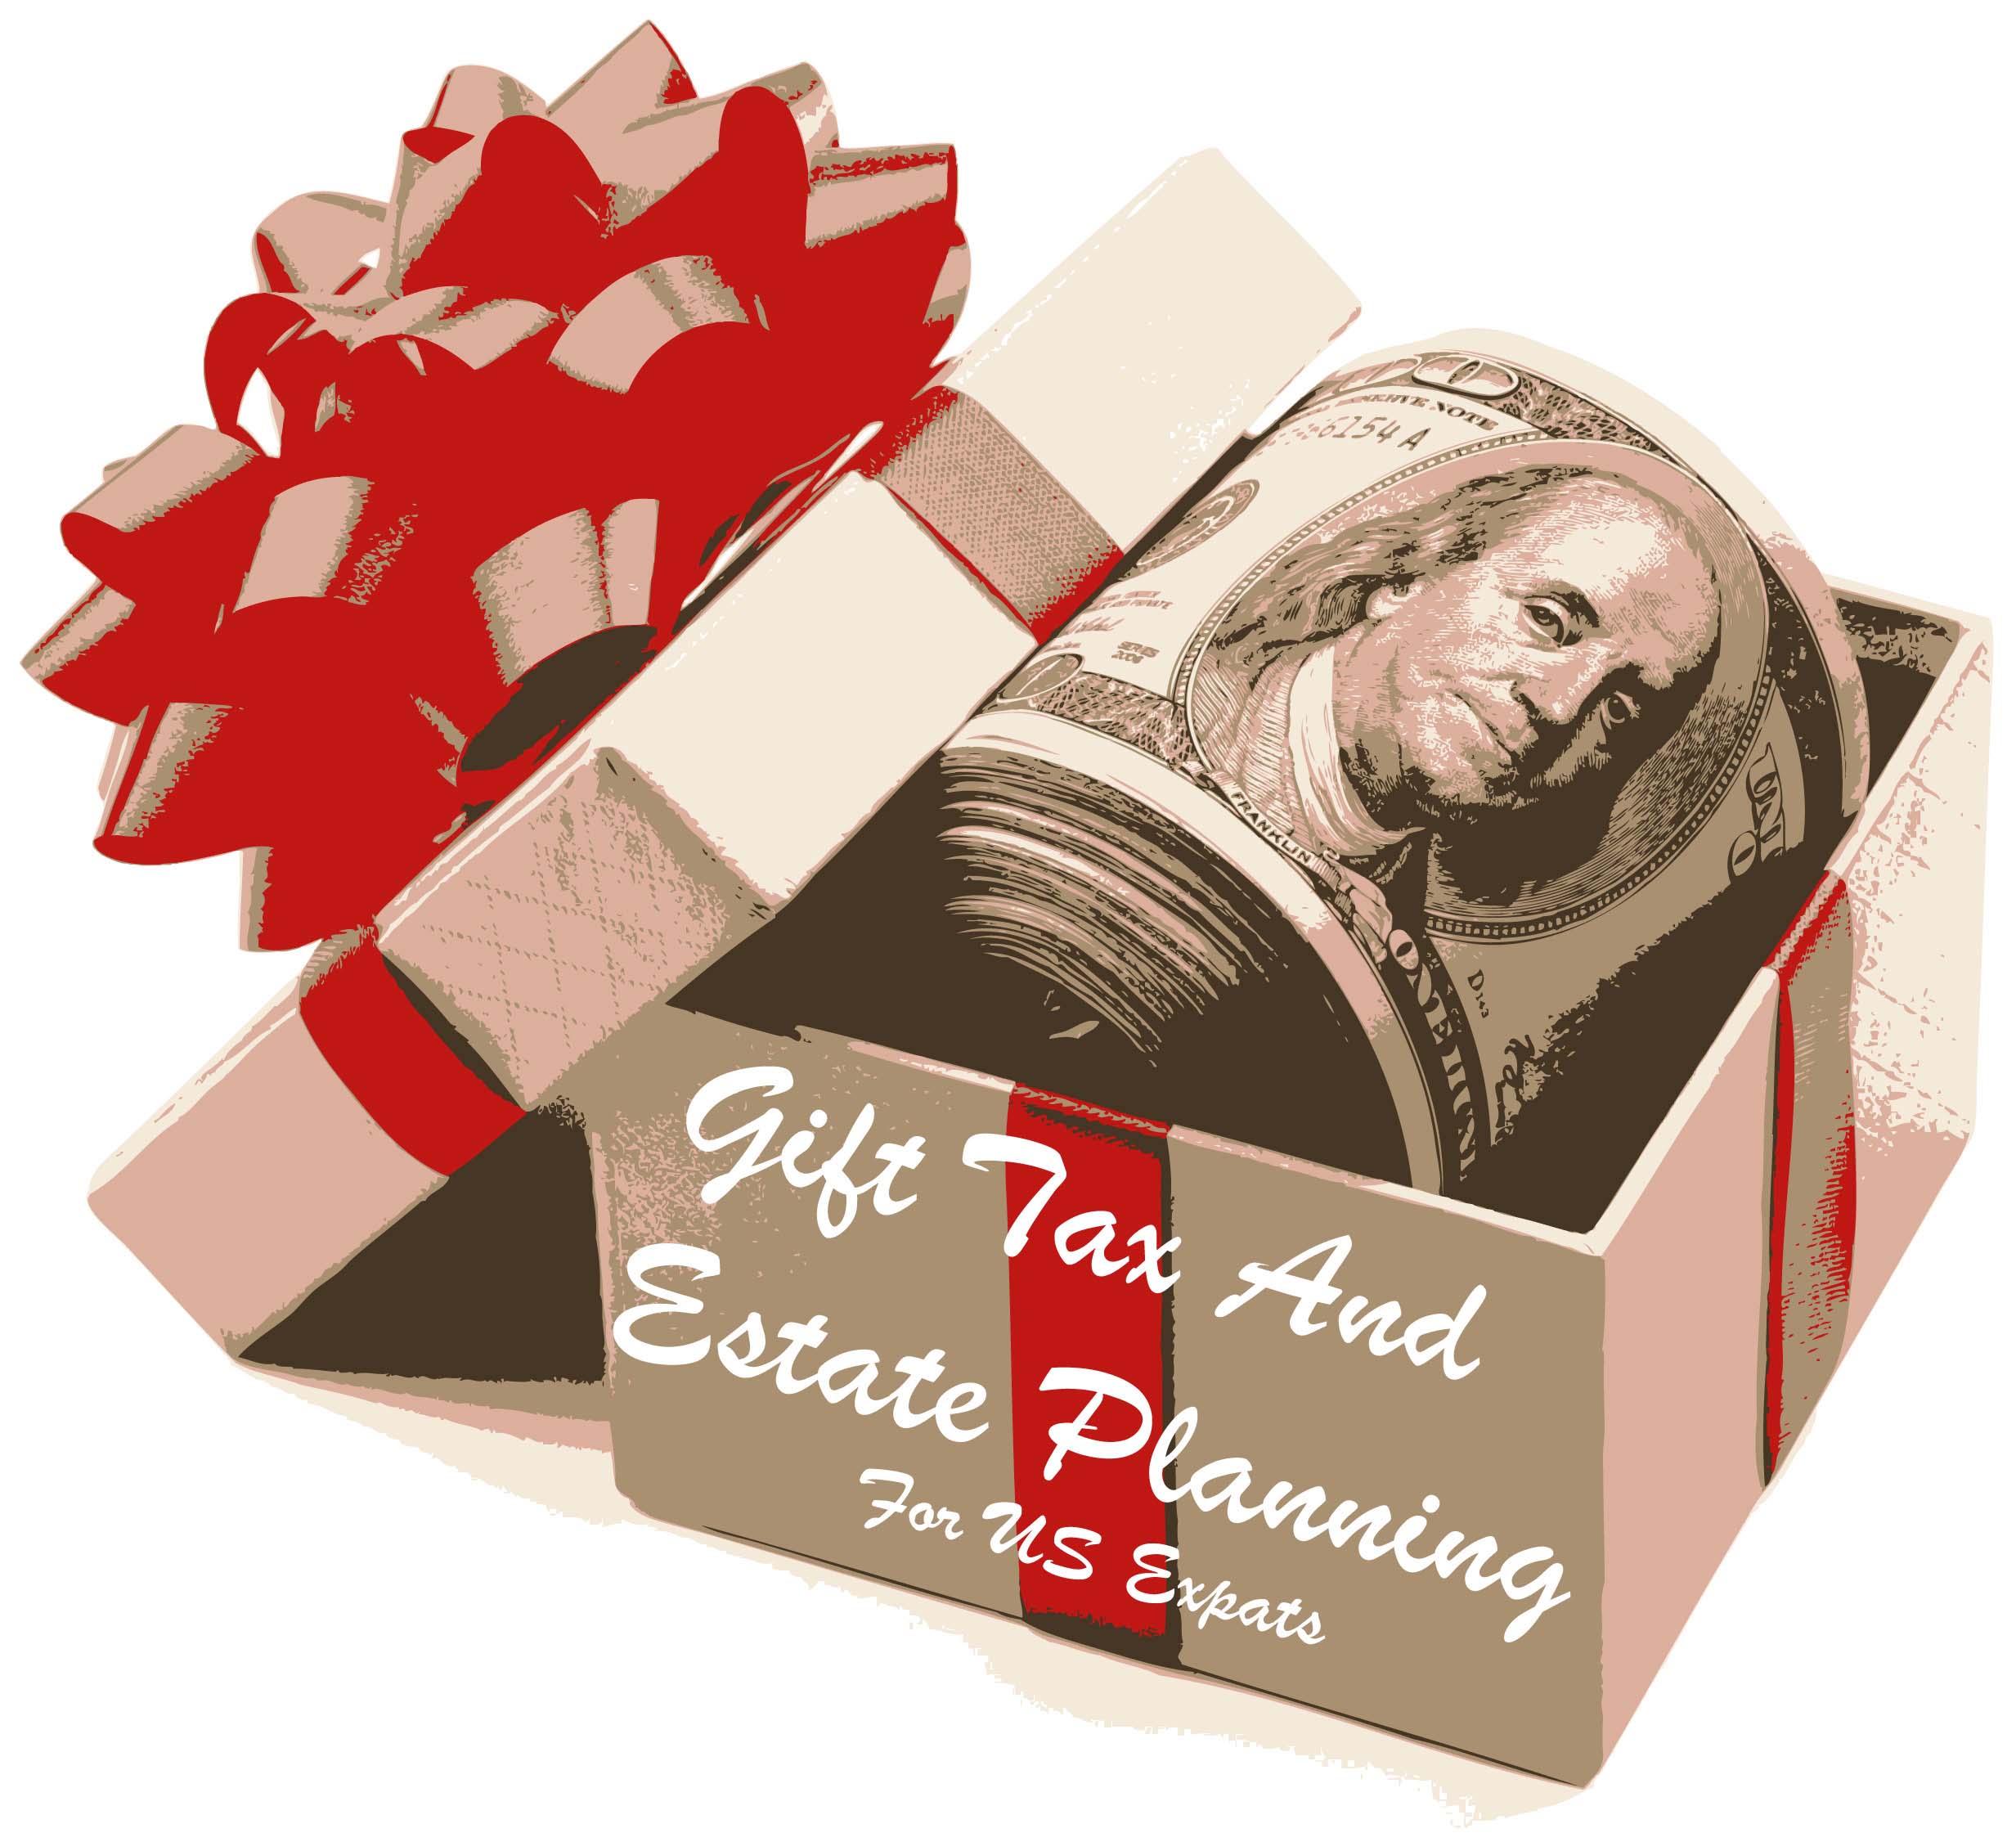 Gift Tax and Estate Planning for US Expats